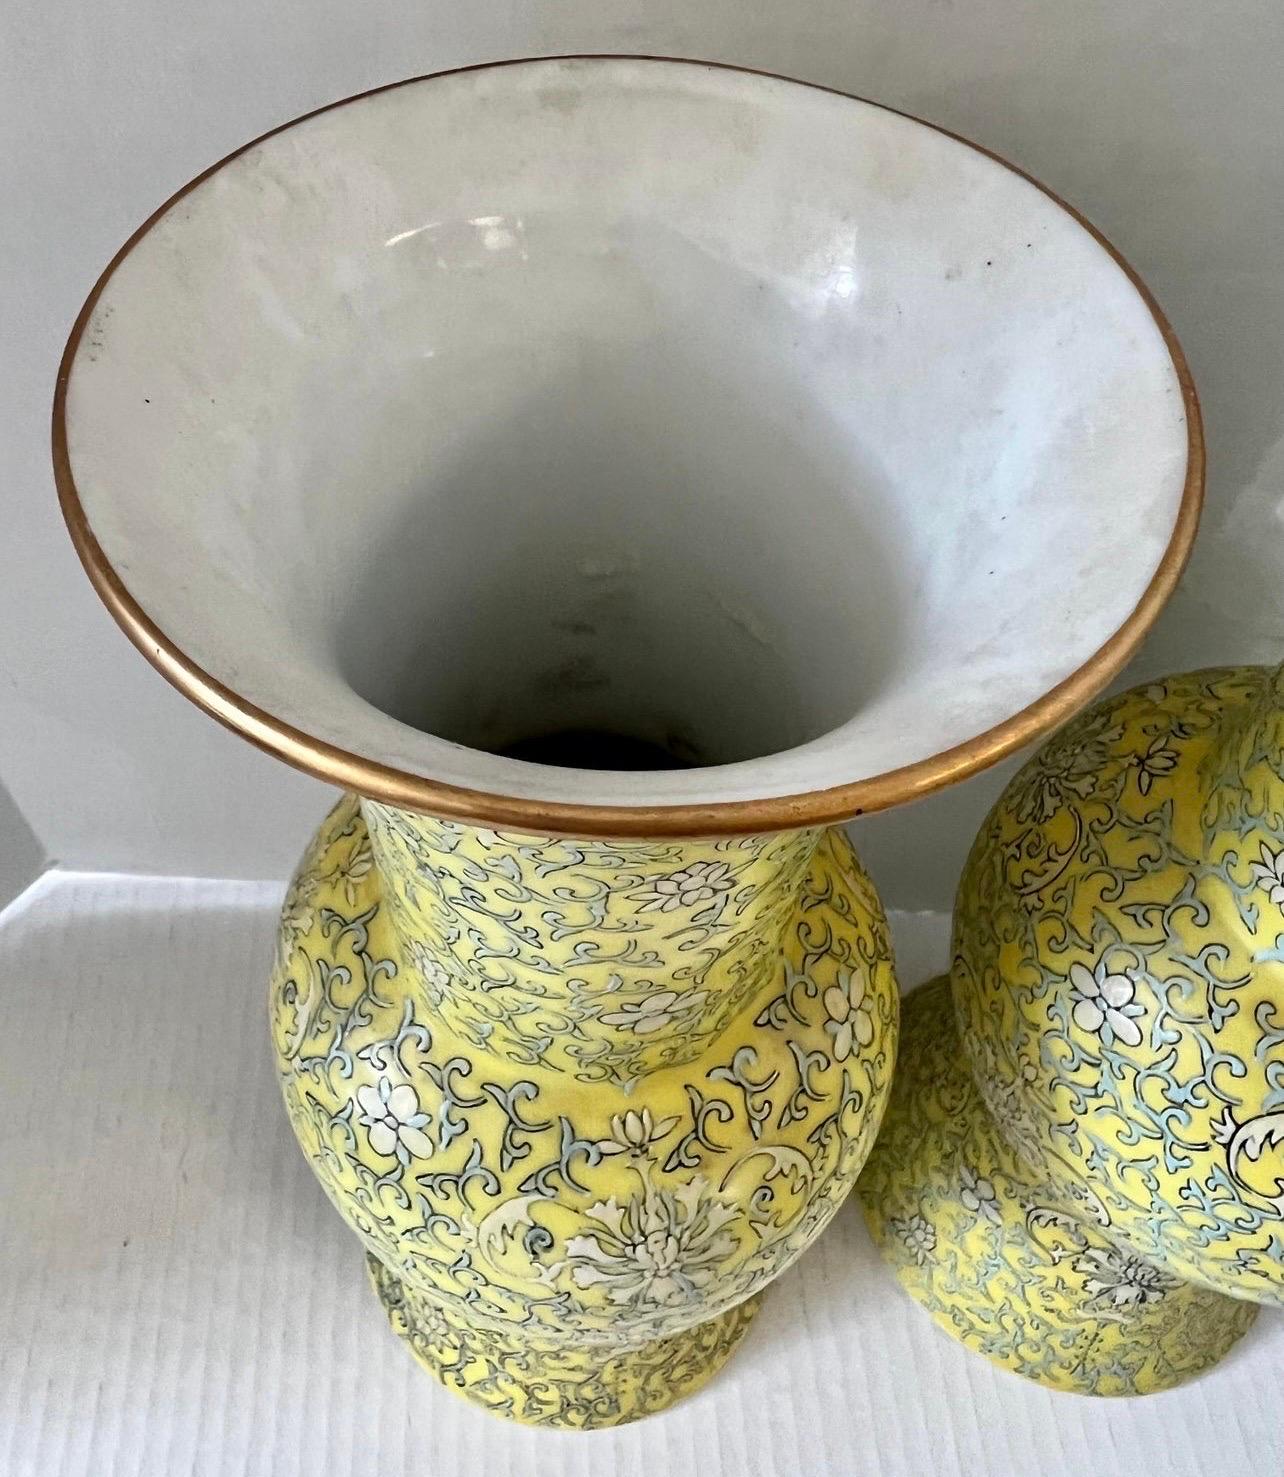 20th Century Japanese Coveted Yellow Porcelain Three Piece Set Bowl & Pair of Vases Matching